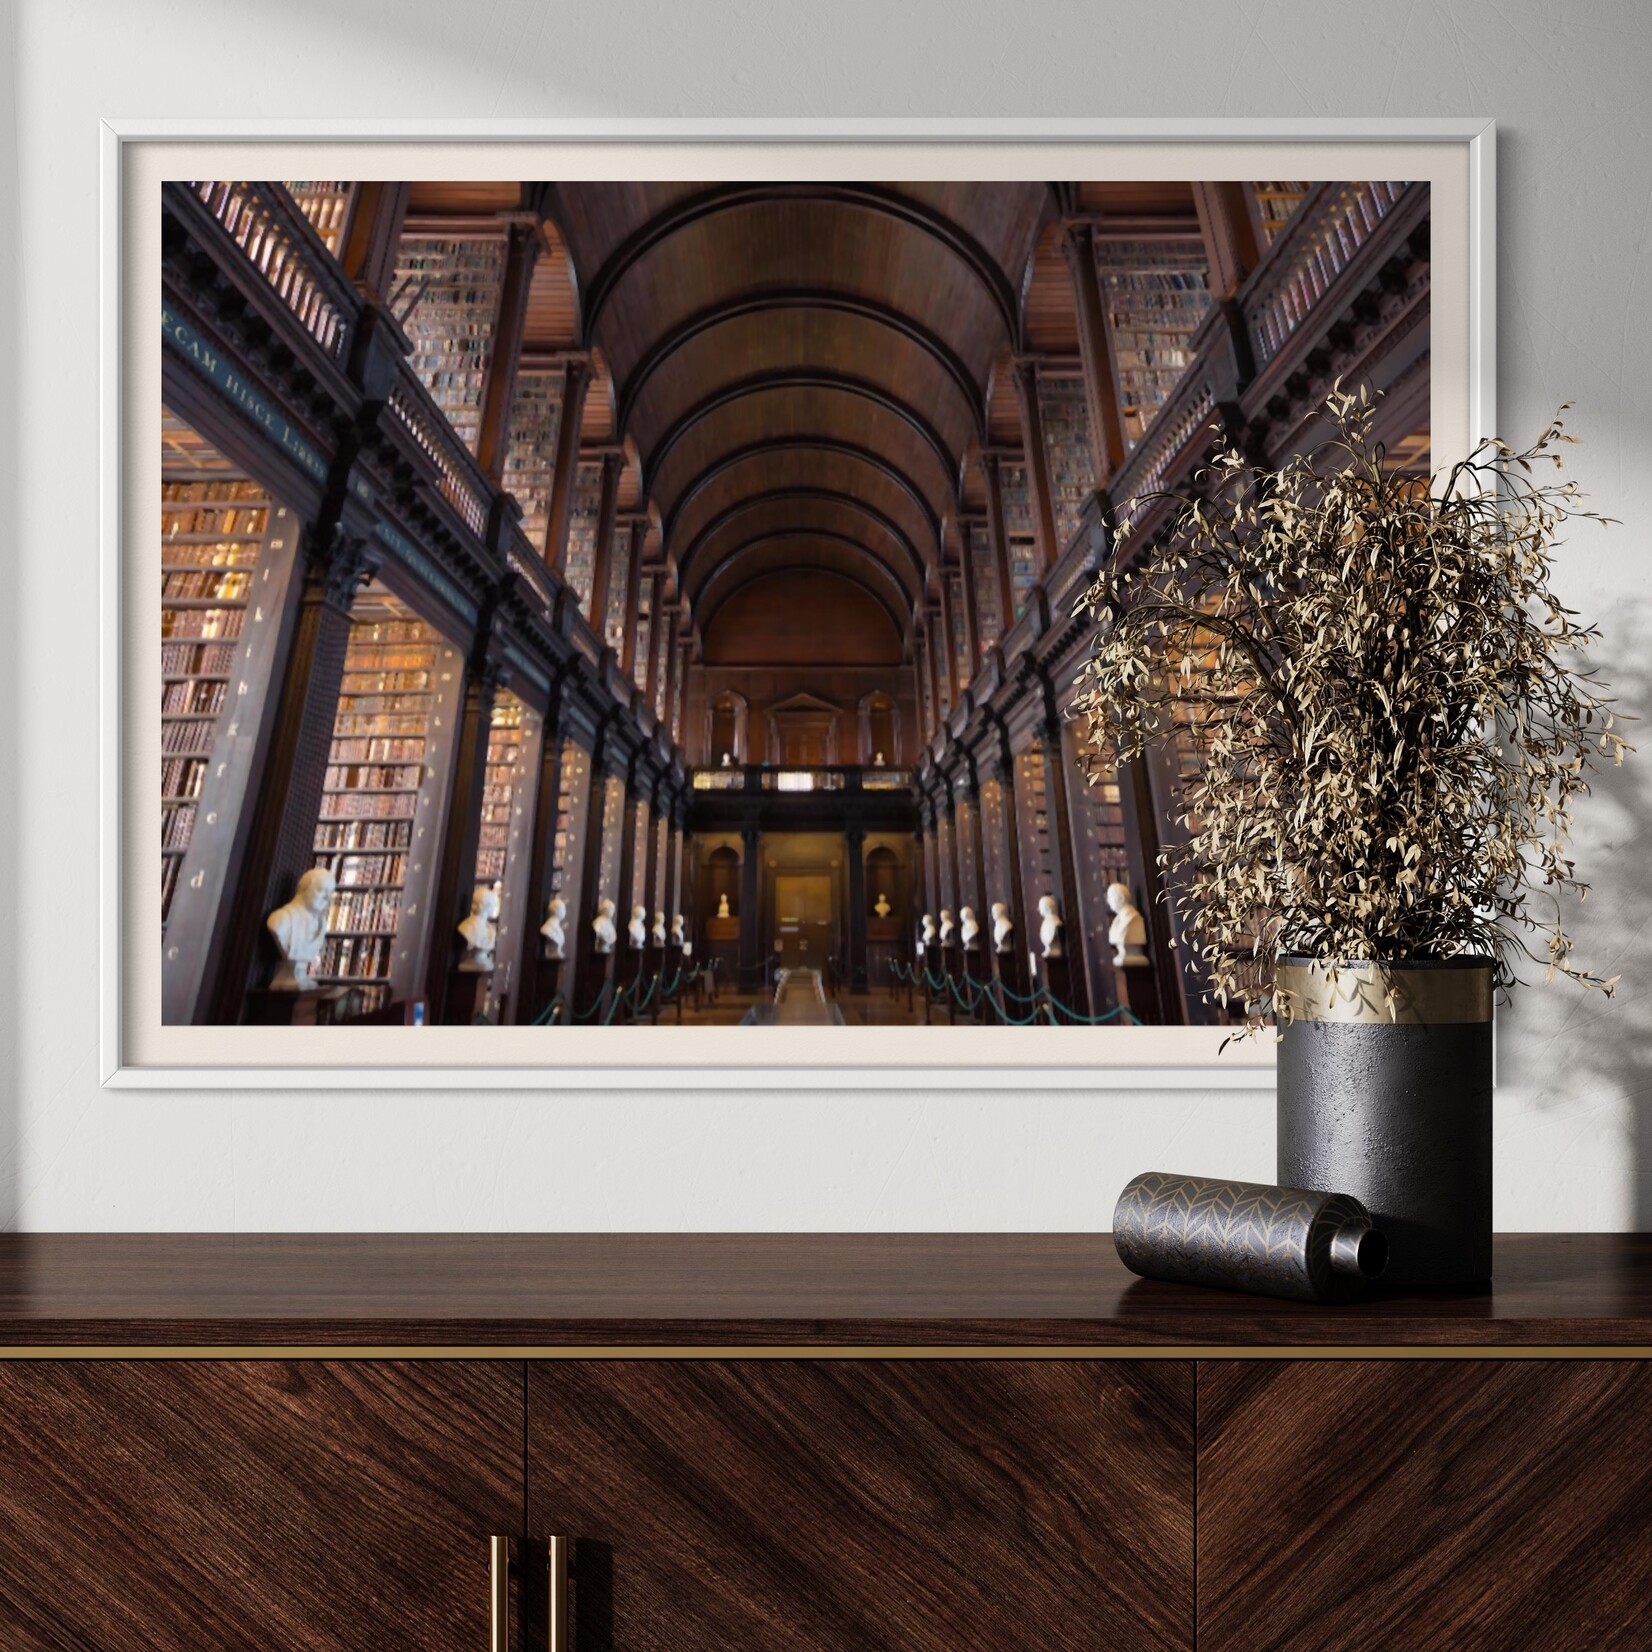 Fine Art Print on Rag Paper Library at Trinity College in Dublin by F. Koherl